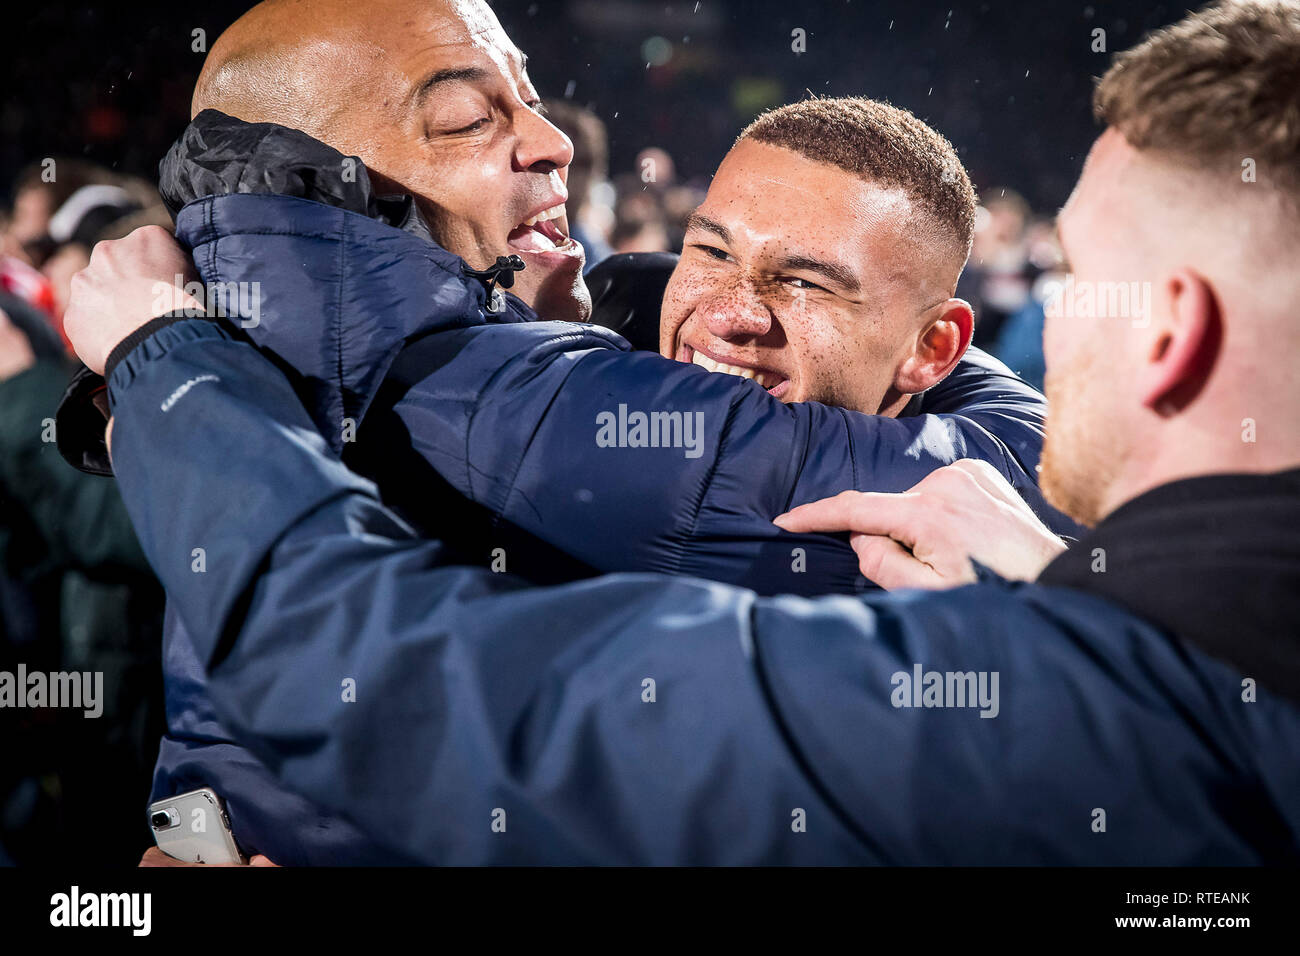 Tilburg, Netherlands. 28th Feb, 2019. TILBURG - 28-02-2019, Koning Willem II stadion Dutch football Eredivisie season 2018/2019. Fans on the pitch during the match Willem II - AZ (KNVB Cup) Semi final. Willem II condition trainer Chima Onyeike, Willem II player Justin Ogenia . Credit: Pro Shots/Alamy Live News Stock Photo